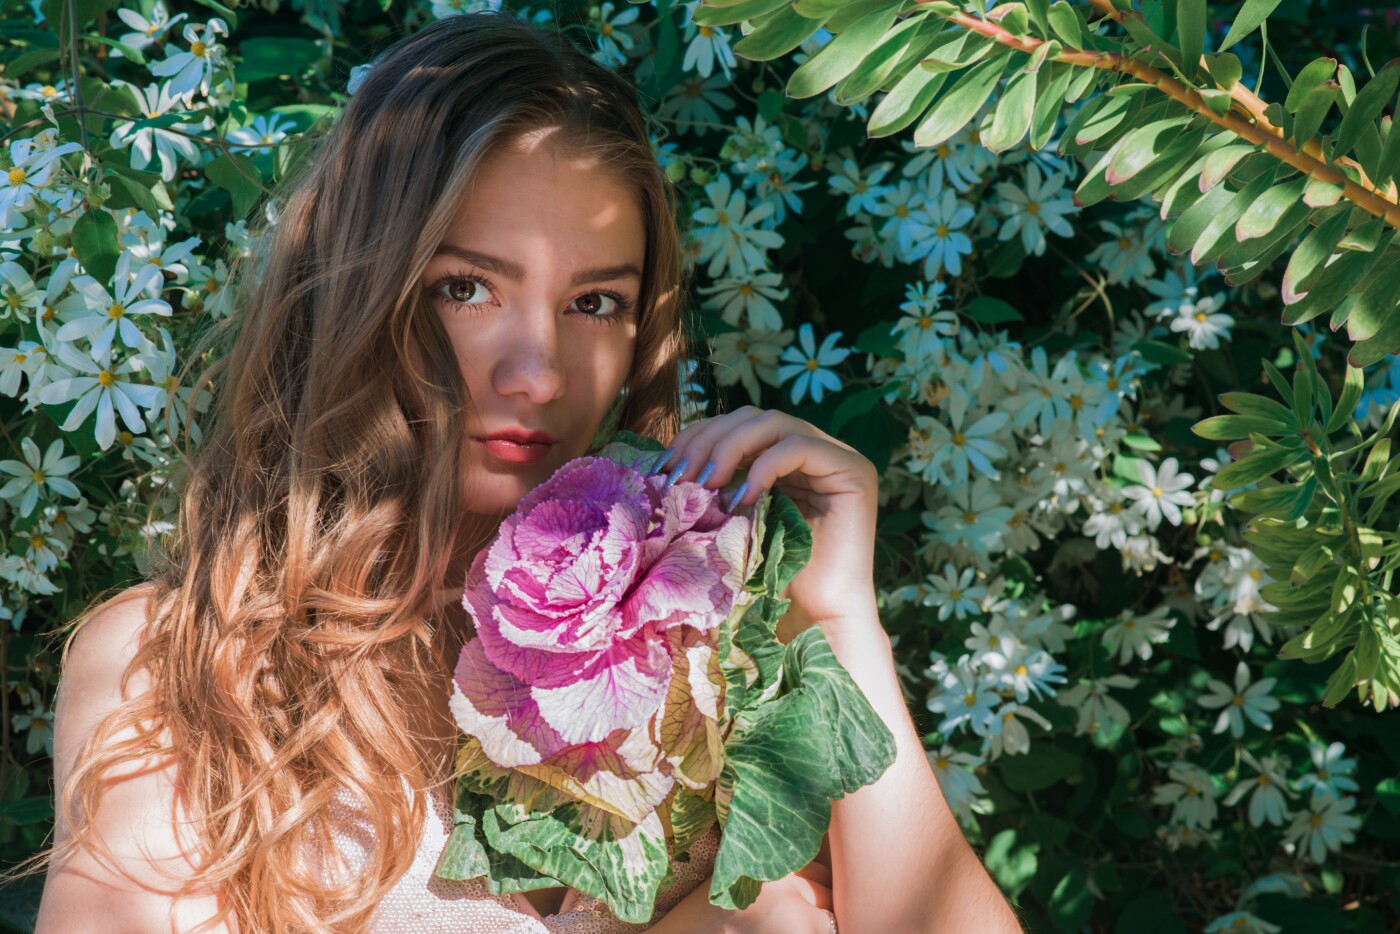 @alex_ride is The model in this photo. We set up a shoot in downtown Los Angeles and she brought a beautiful flower arrangement with her. She took it apart and go this cabbage out of the arrangement and we decided to get some shots with it and I was able to capture this shot of her. <br />
Follow my instagram @optic.visionary to view more from this shoot. 